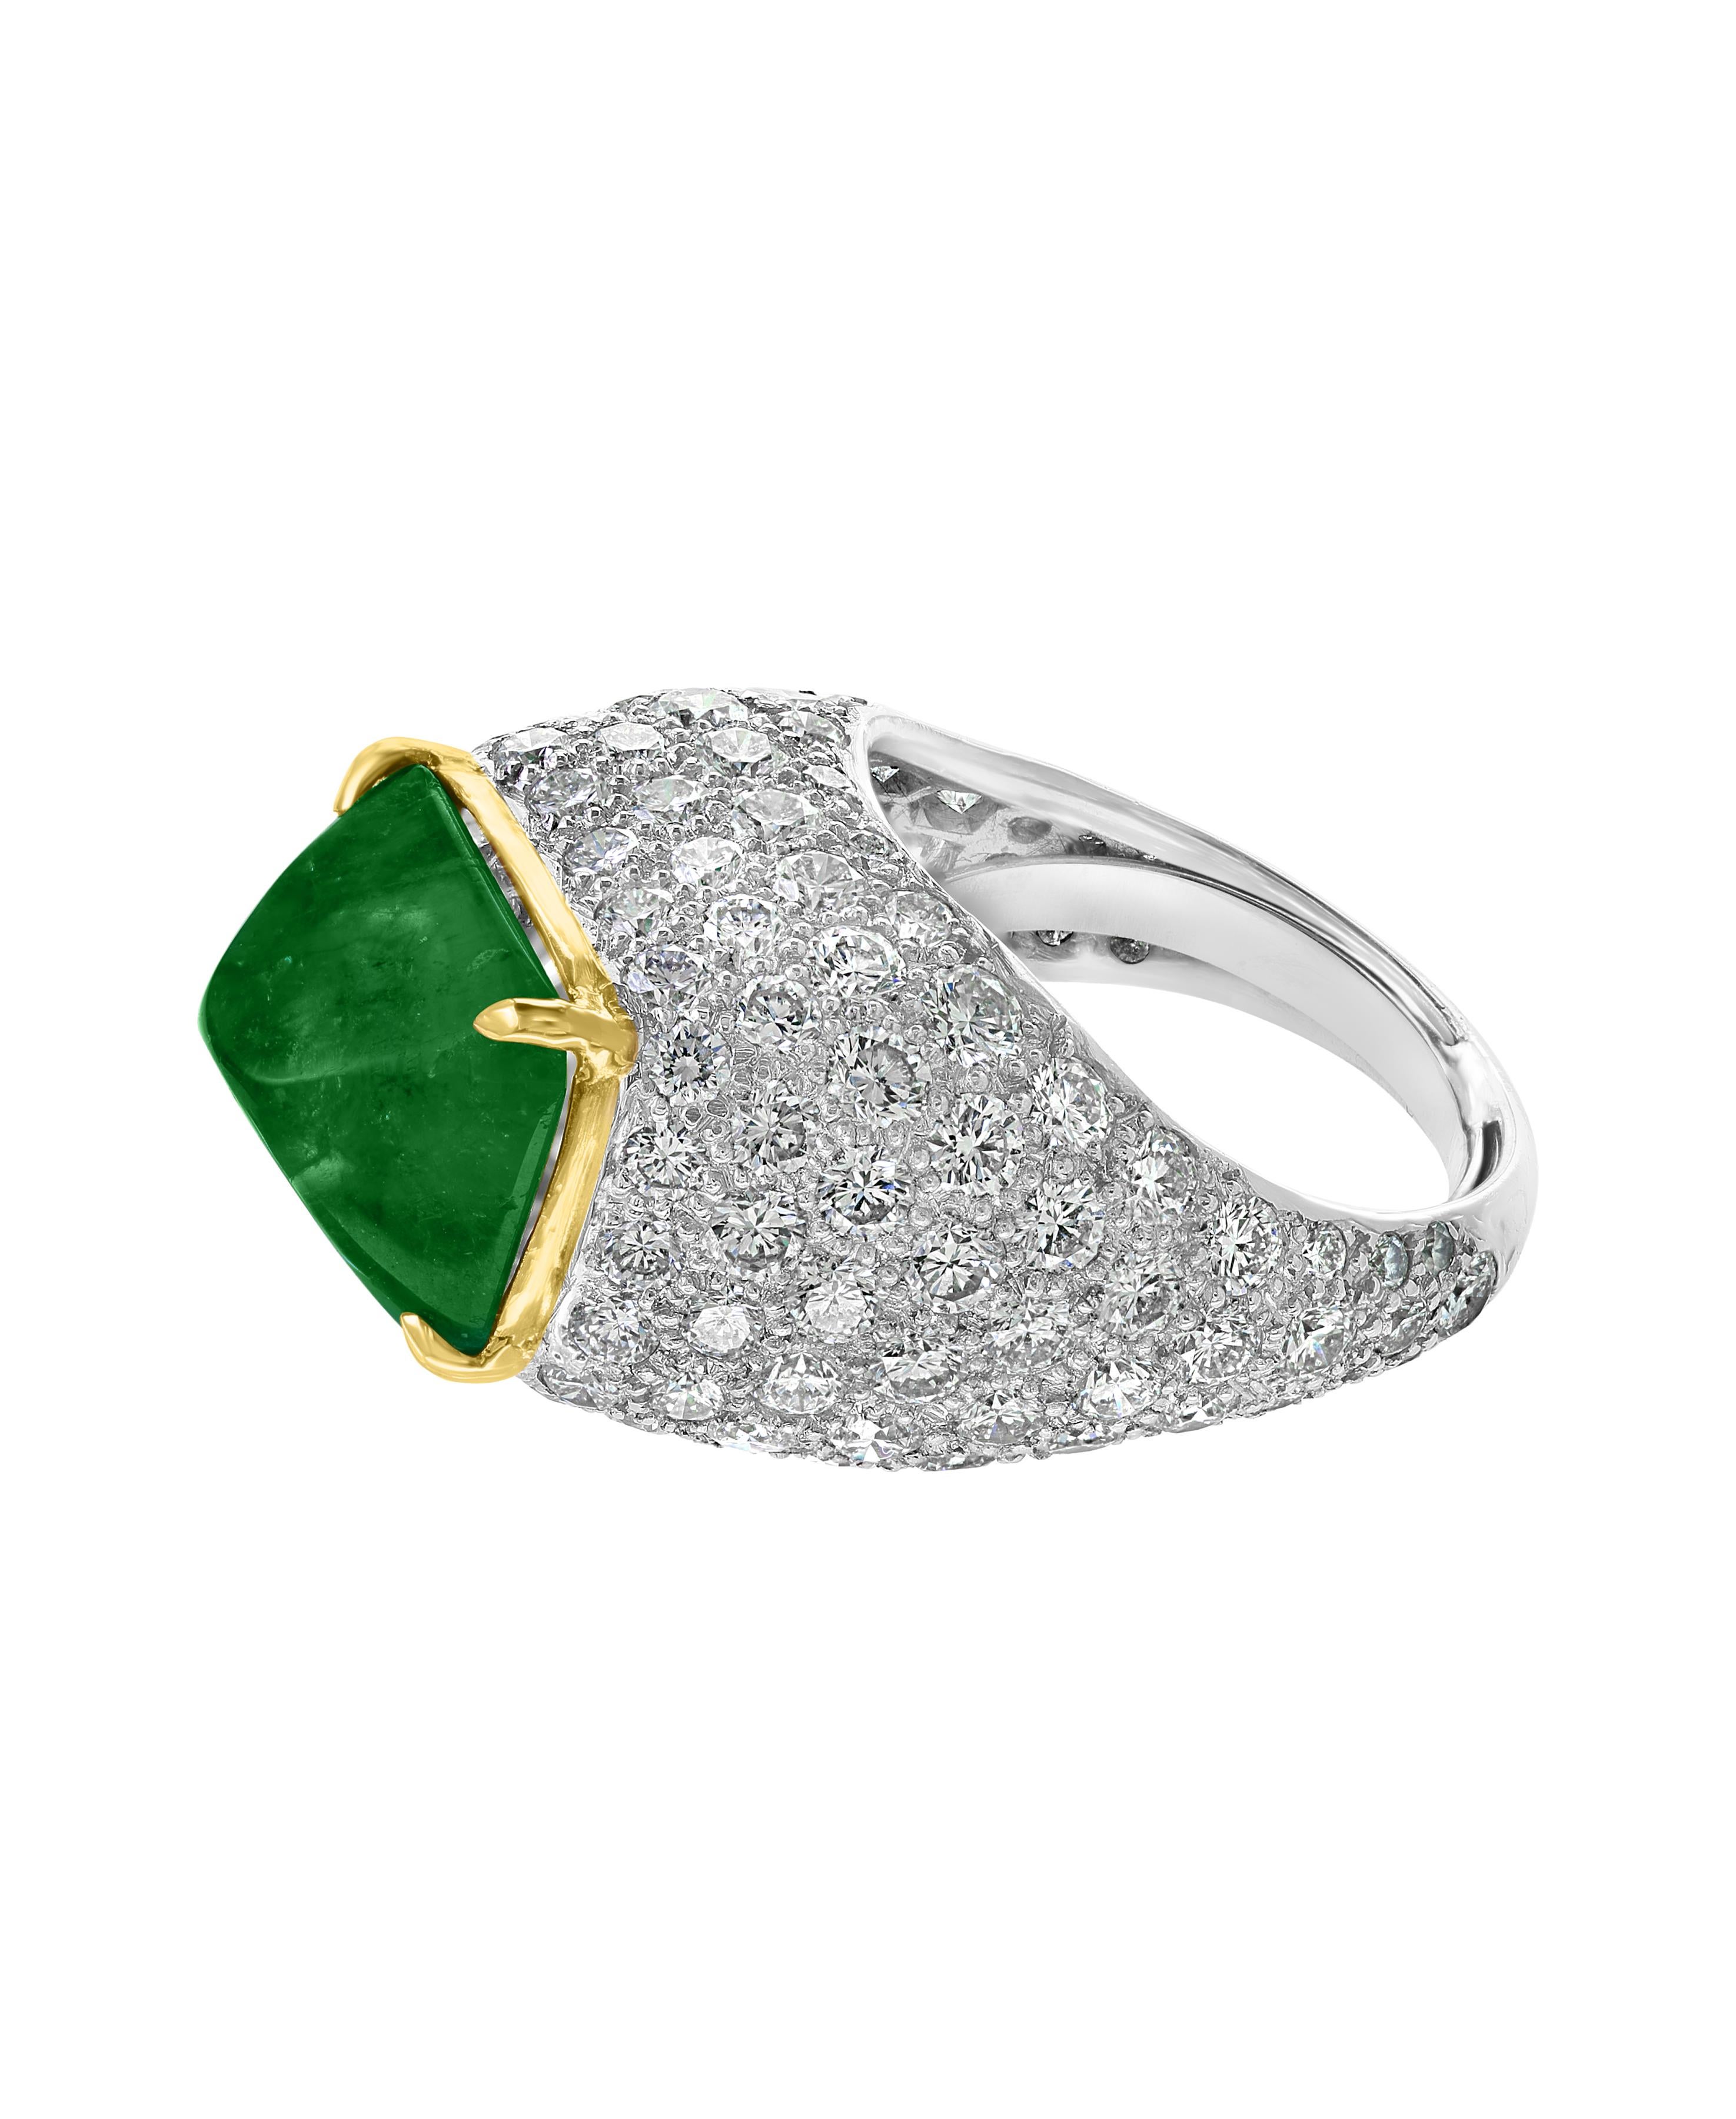 A classic, Unisex ring
Approximately 10 Carat  Colombian Emerald  Sugar Loaf Cabochon and 
approximately  10 Carats of Diamond Ring, Estate with no color enhancement.
 Diamonds: approximate 10 Carat 
Platinum 14 Grams
Emerald: 10 Carat 
GIA